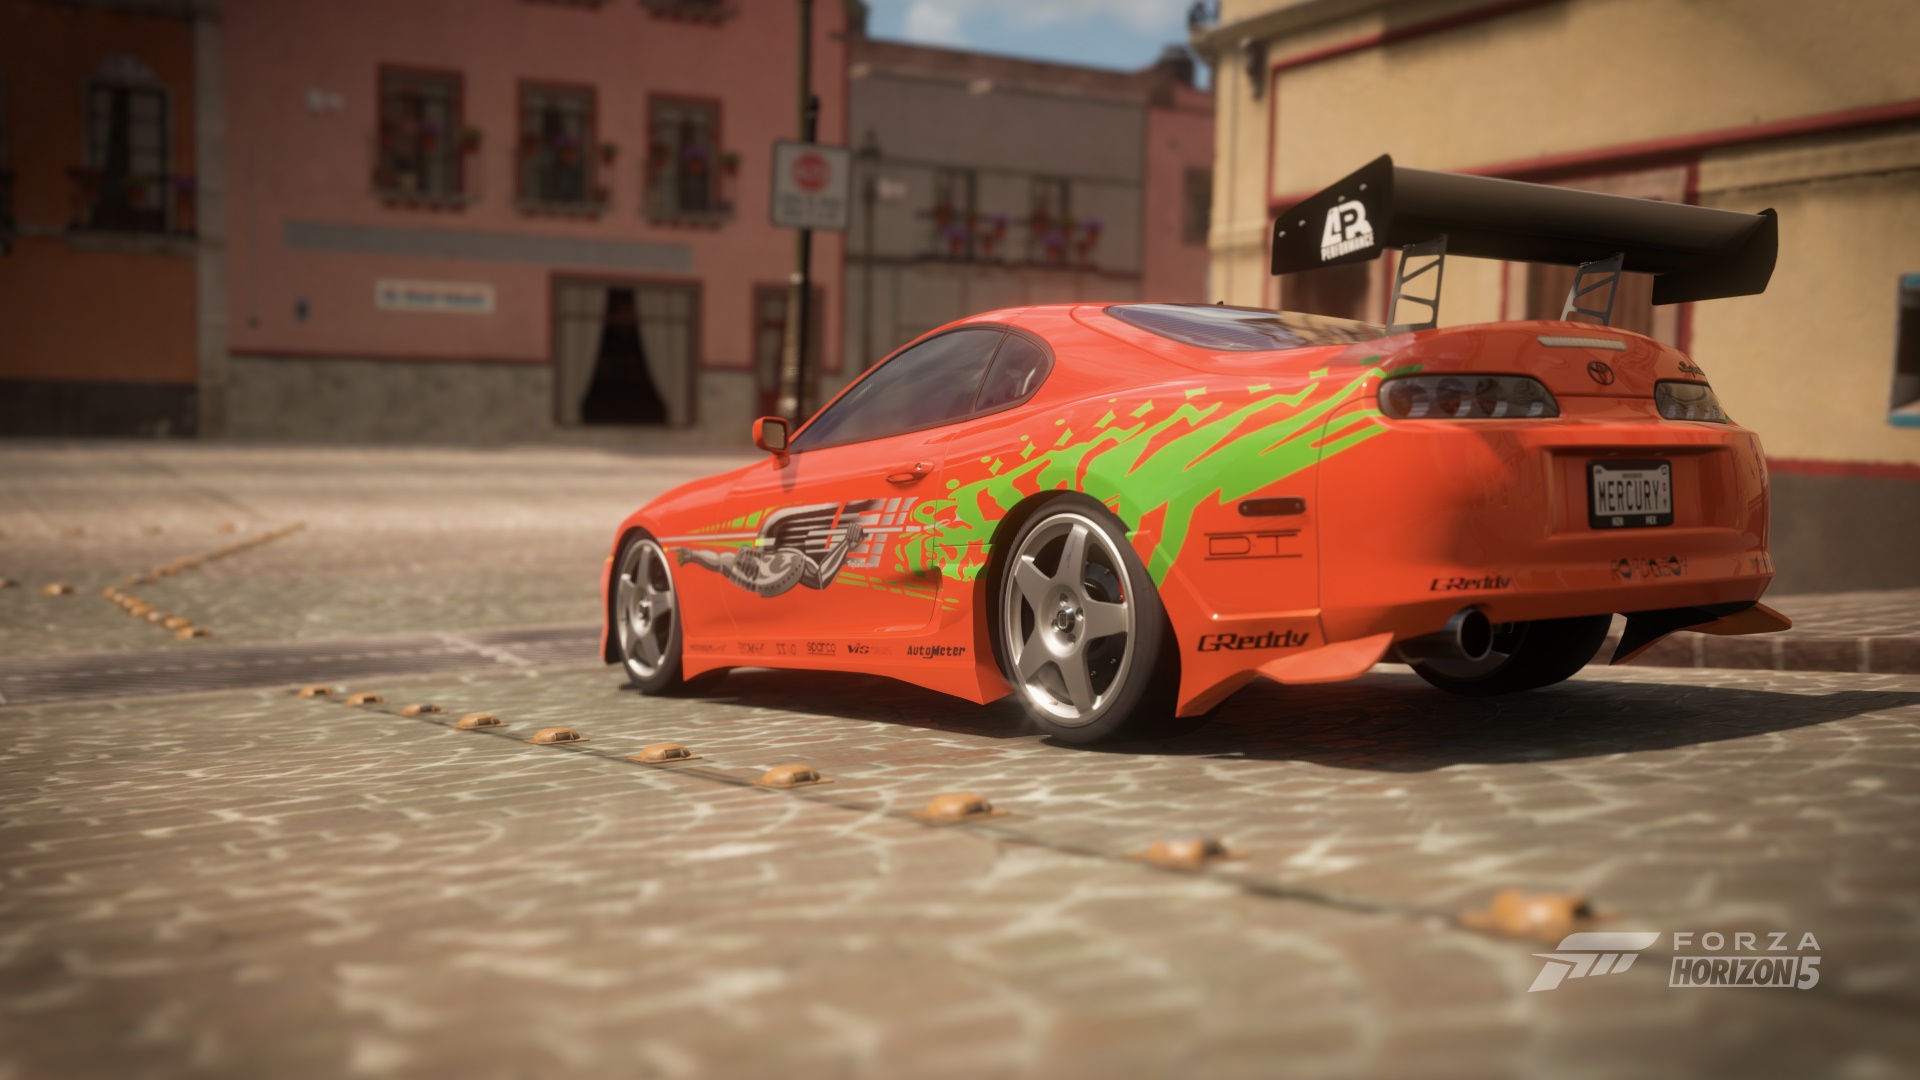 General 1920x1080 Toyota Supra A80 Forza Horizon 5 Fast and Furious car video games